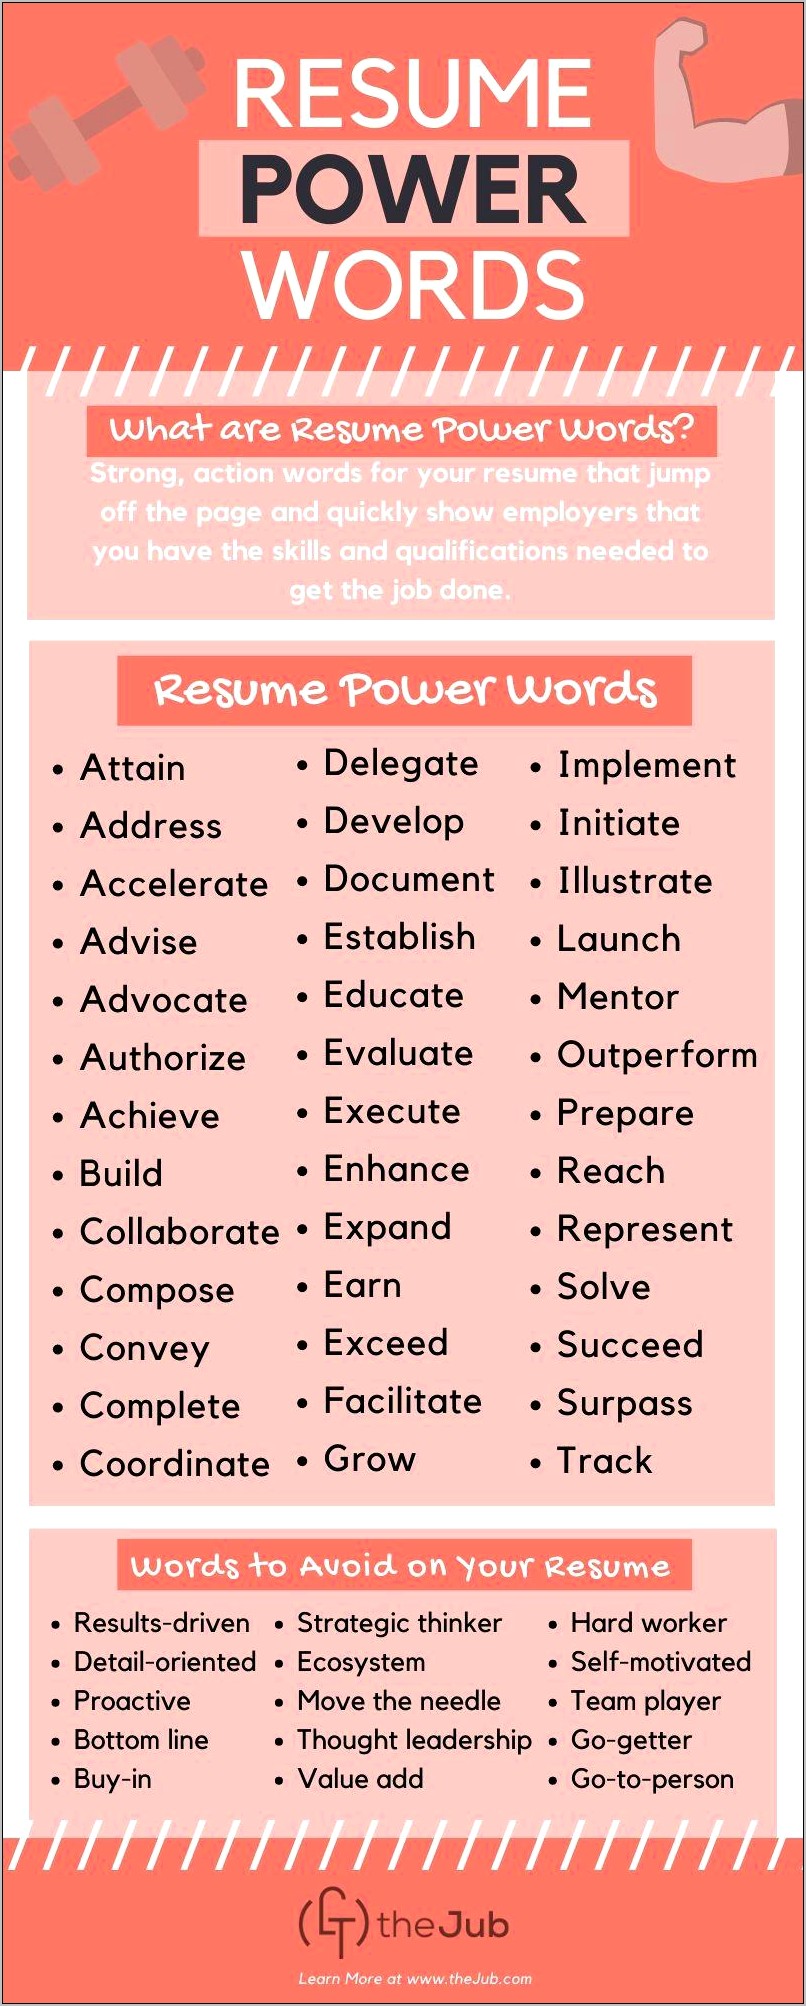 Another Way To Say Hard Worker On Resume